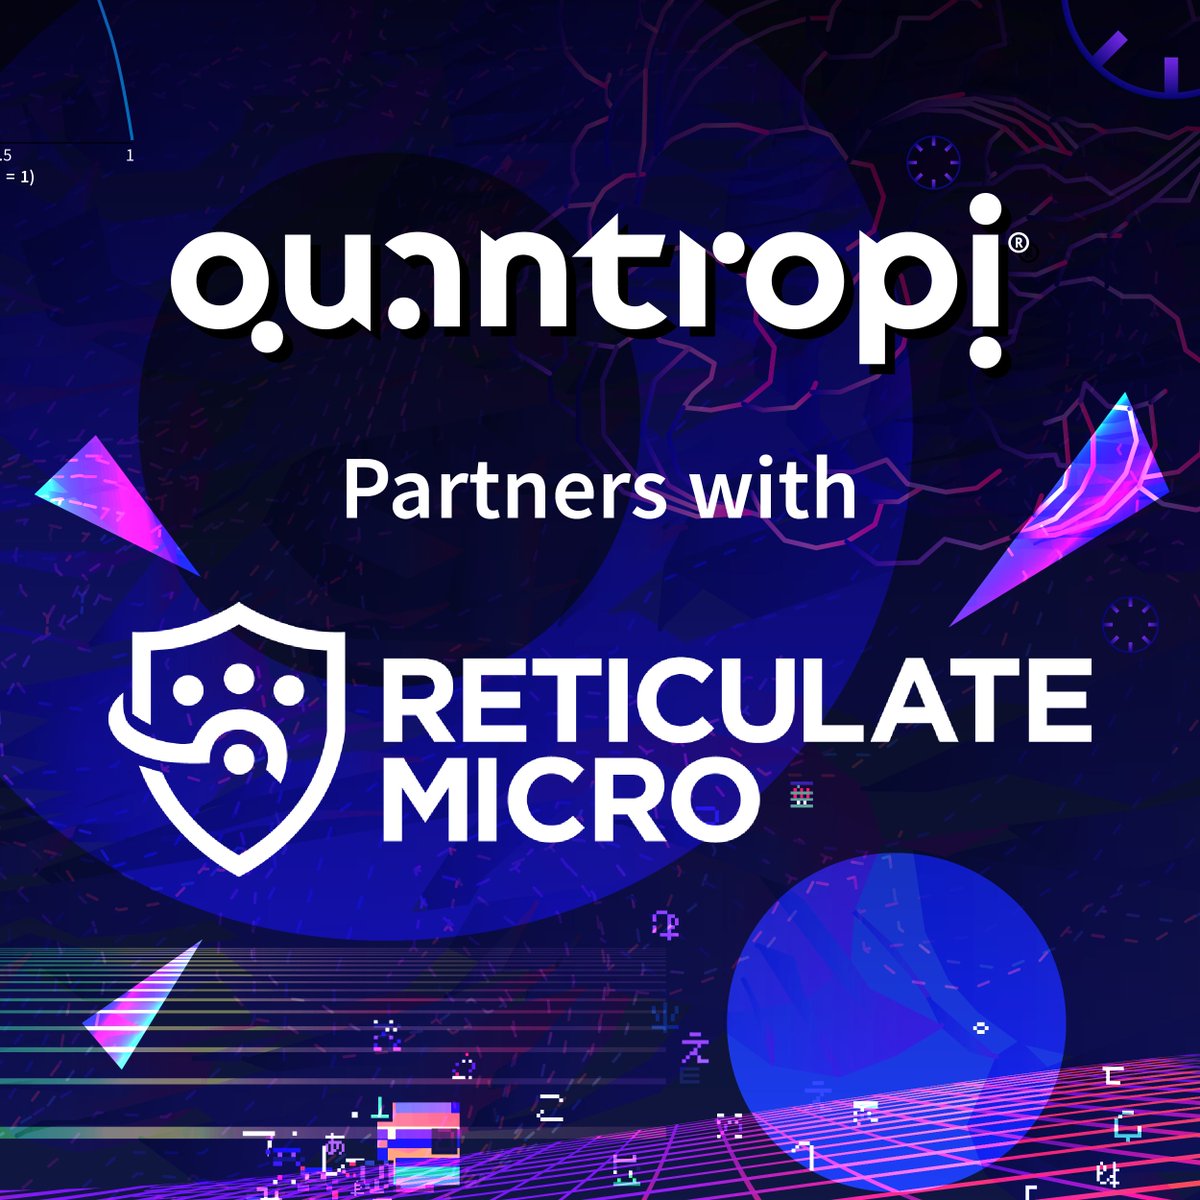 We are delighted to announce our exclusive partnership with @reticulateio to market the world's first Video encoding platform with integral Post-Quantum security. Learn more about this game-changing collaboration: hubs.li/Q02skBx_0